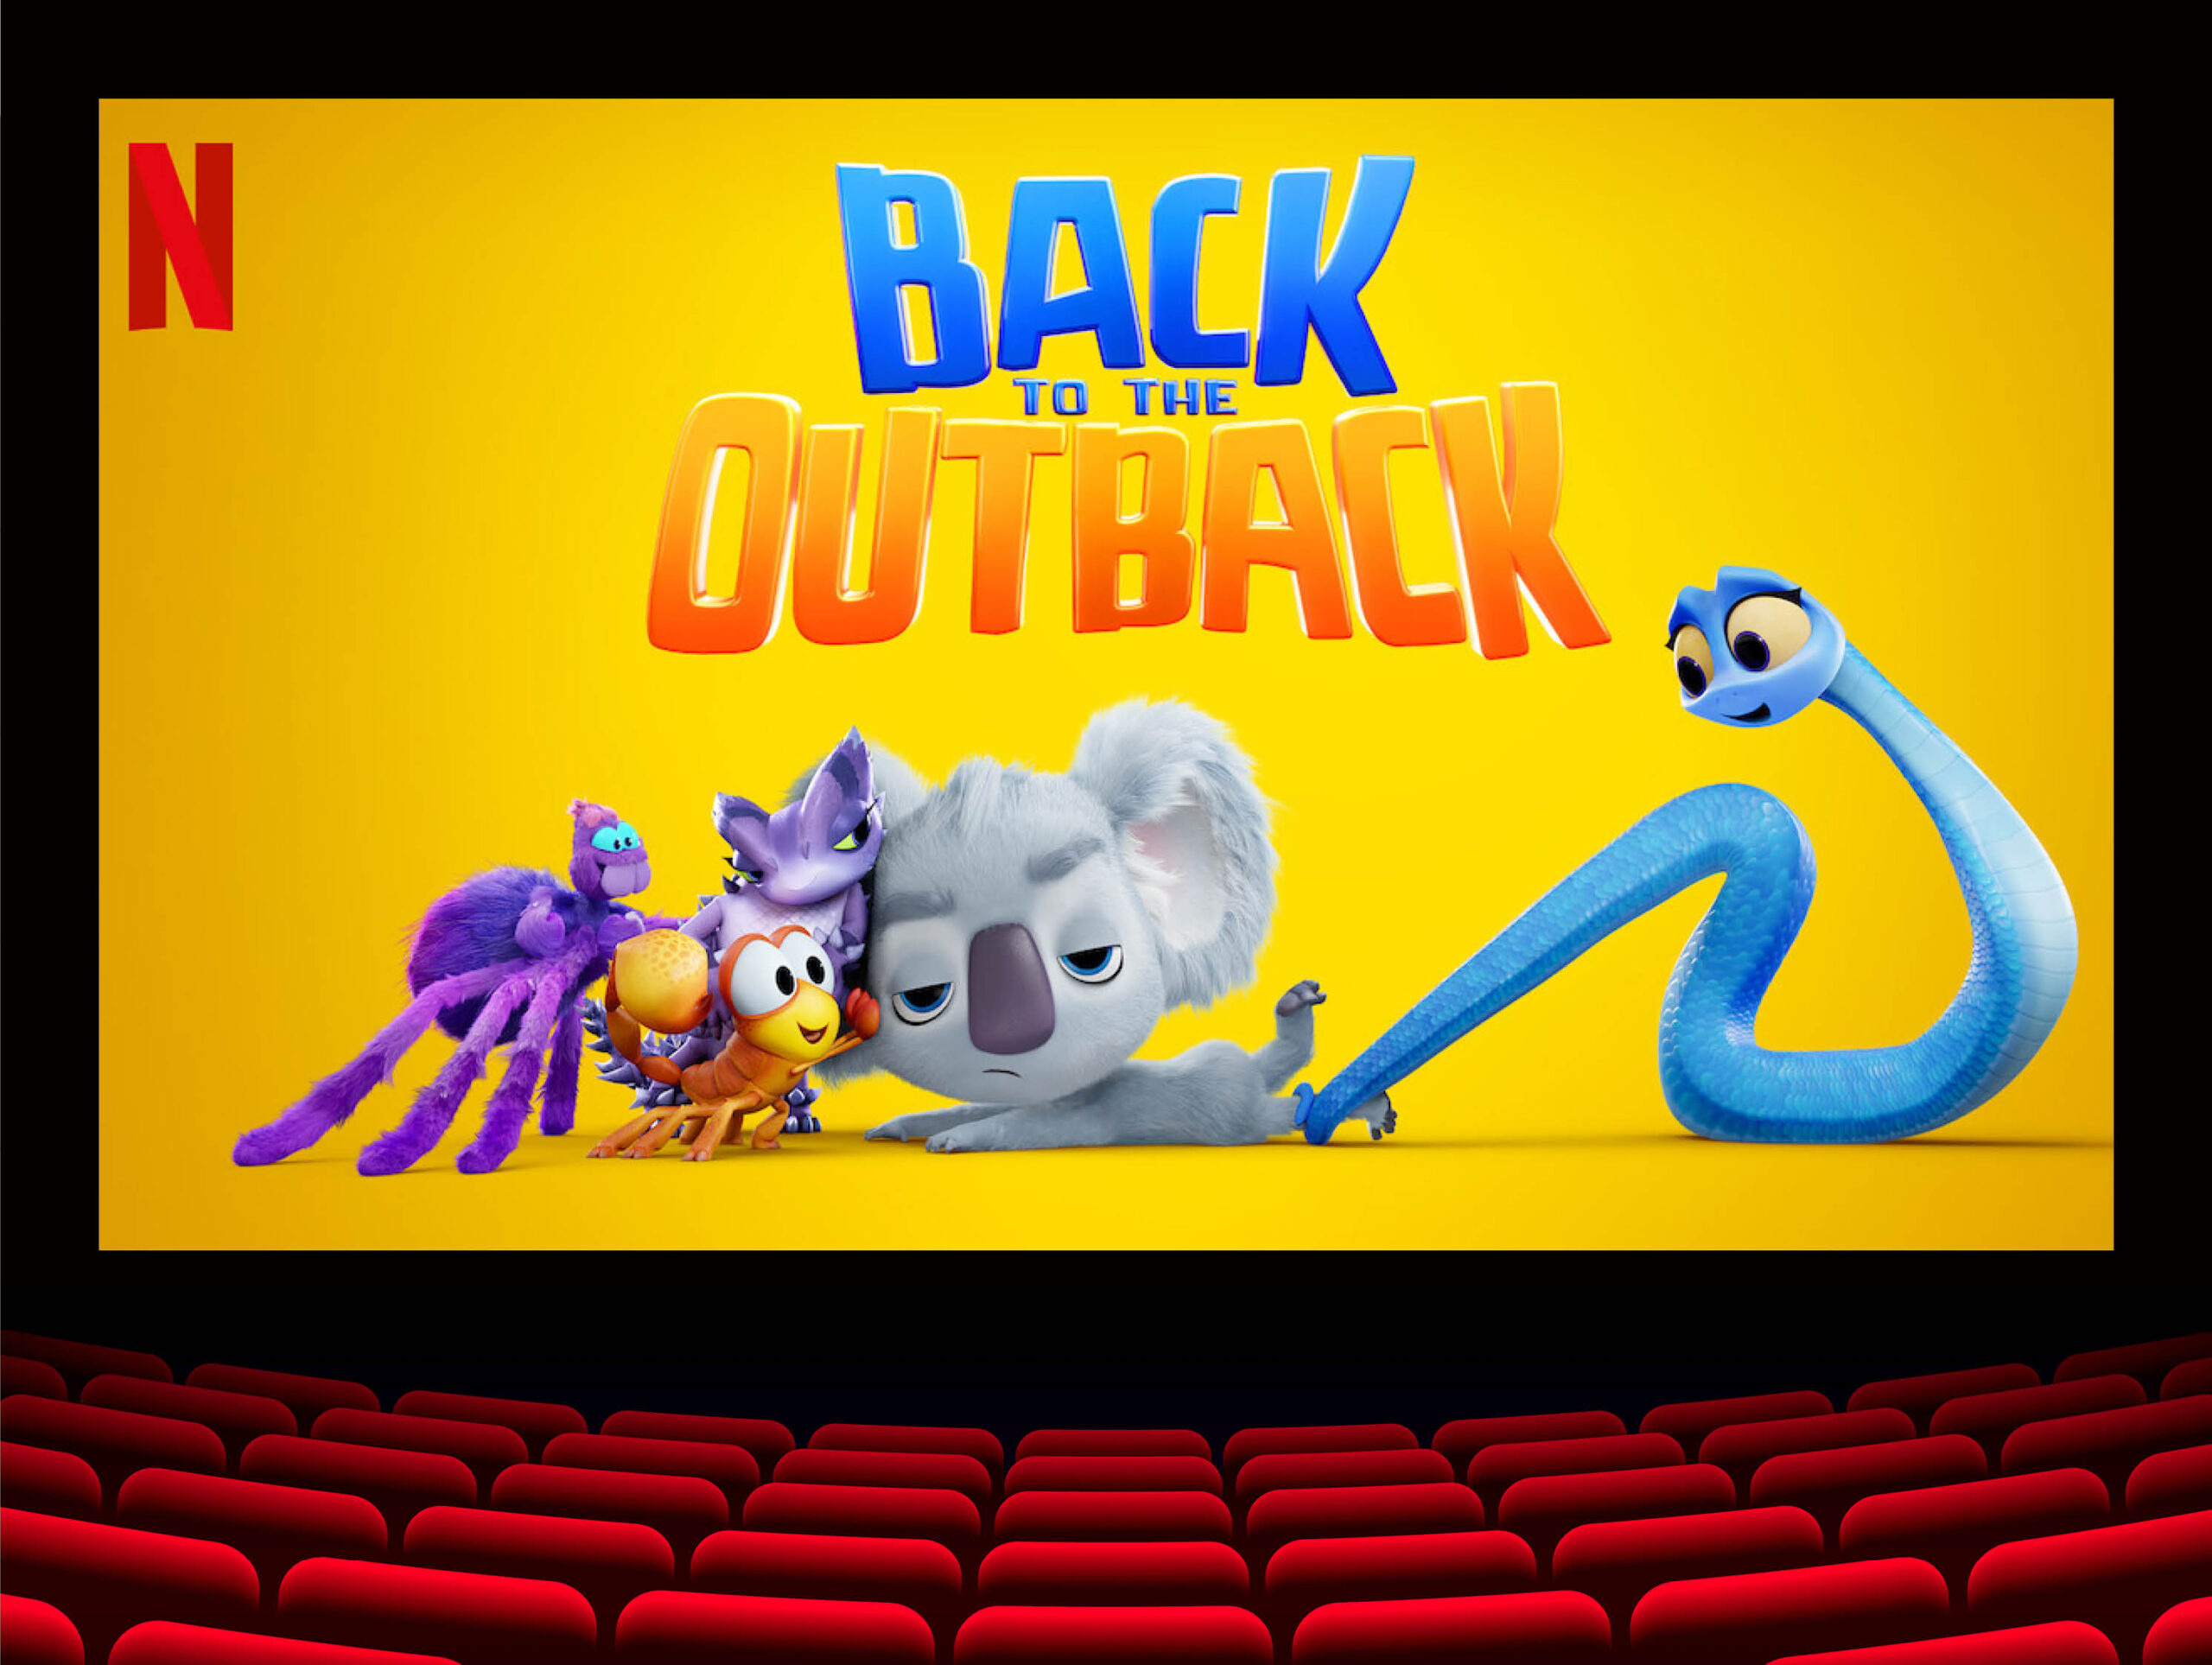 Back to the Outback, Official trailer, Family-friendly movie, Kids entertainment, 2560x1930 HD Desktop